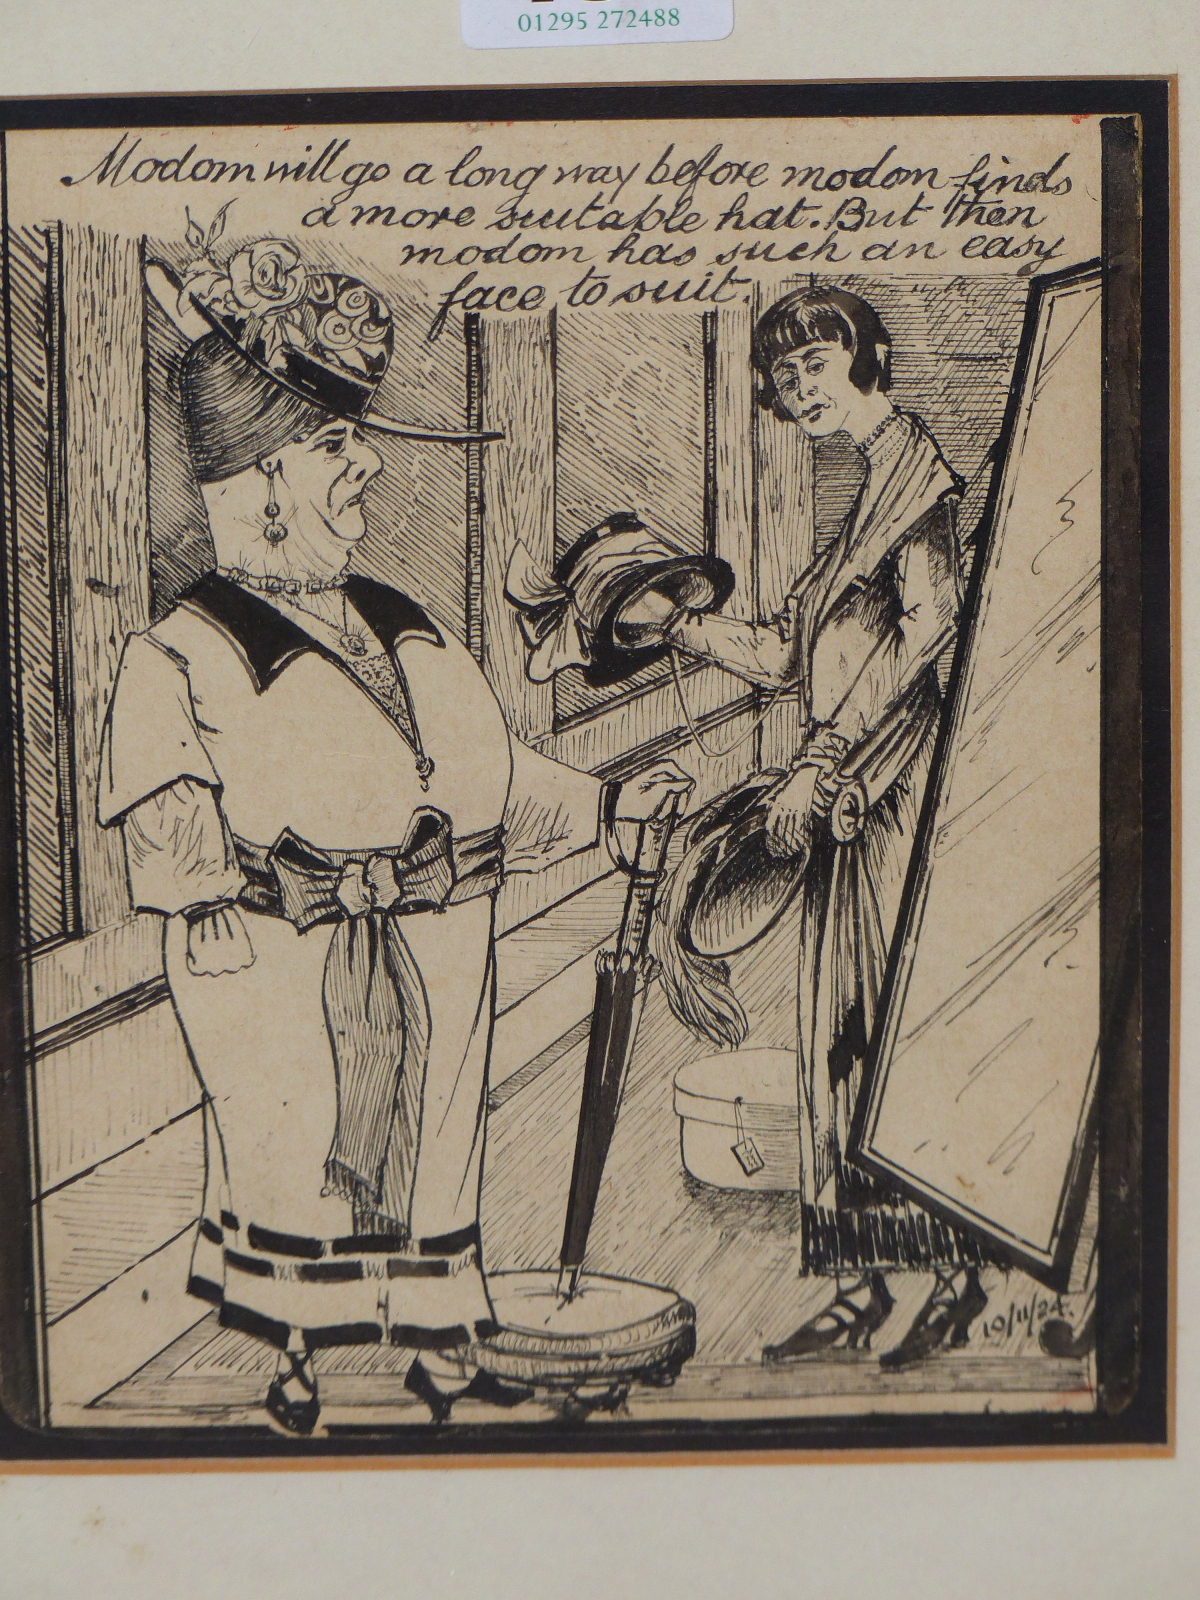 AN EARLY PEN AND INK CARTOON OF A LADY TRYING ON HATS, DATED 10/11/24, TOGETHER WITH A WATERCOLOUR